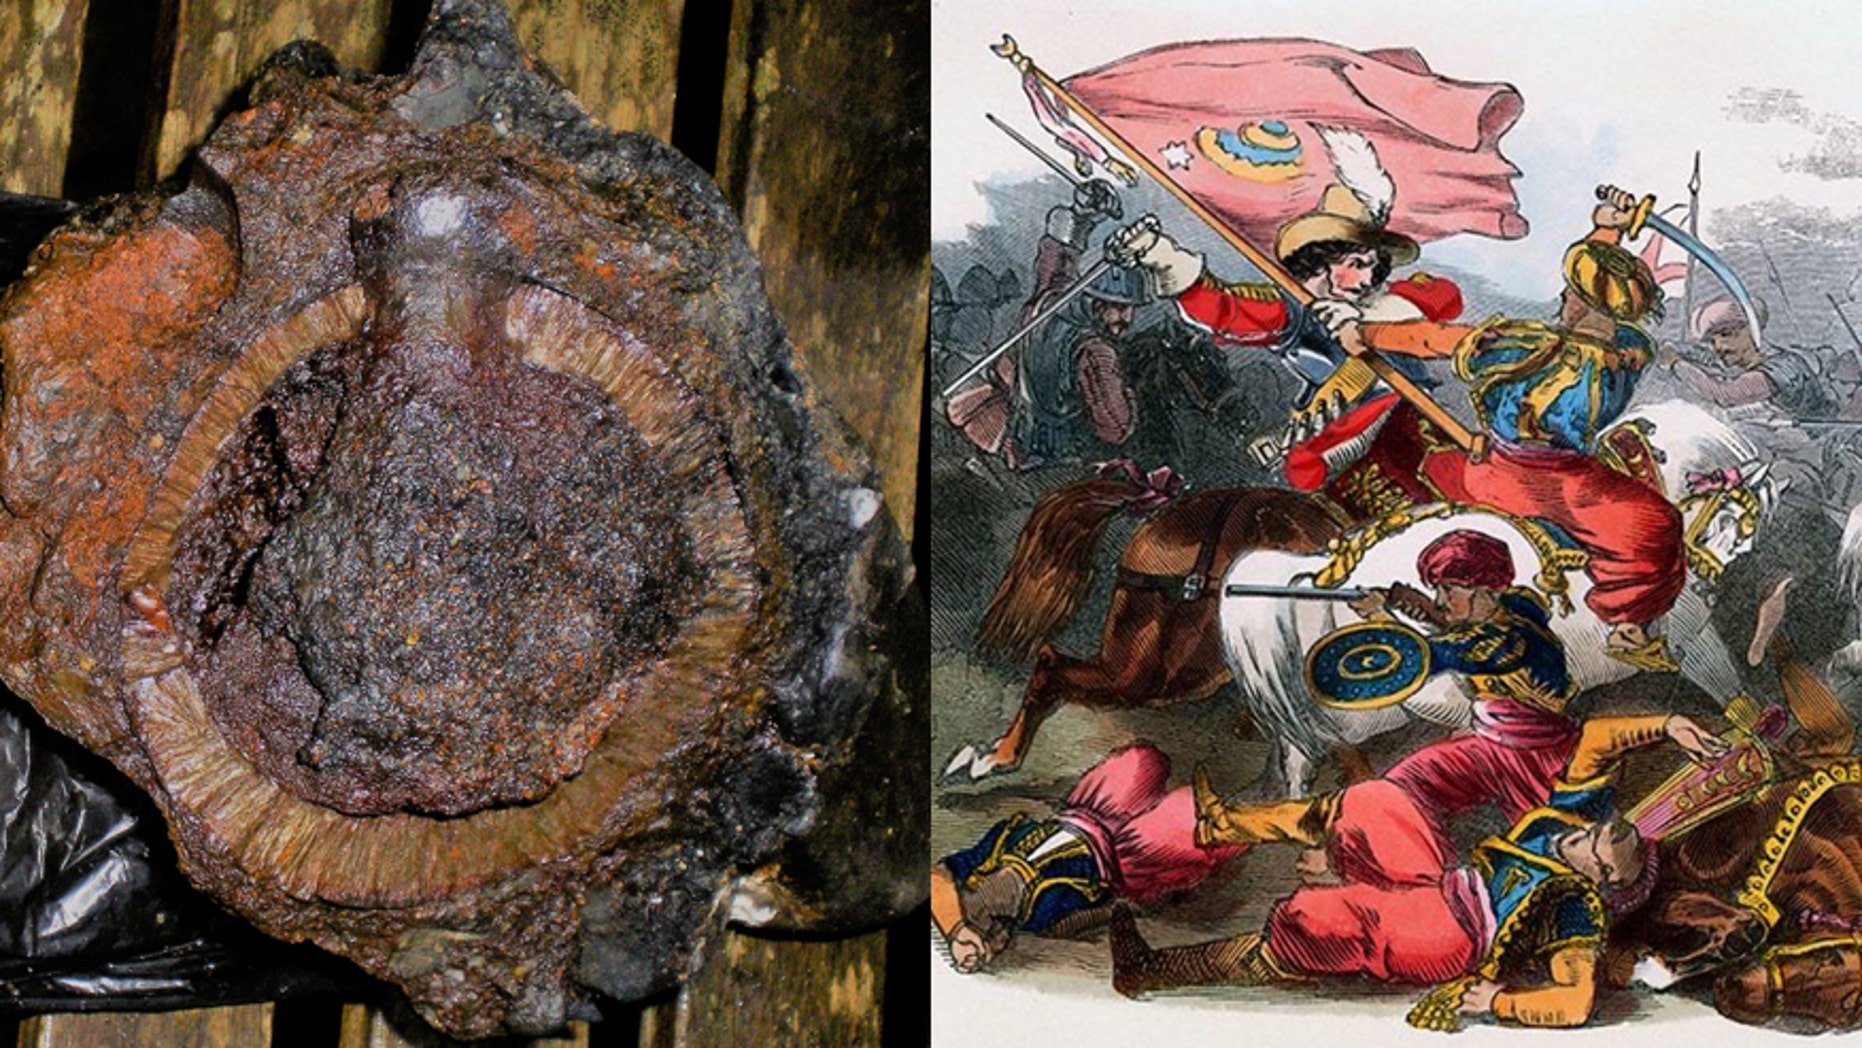 'Pirate ship' hand grenade discovered near 17th-century wreck site